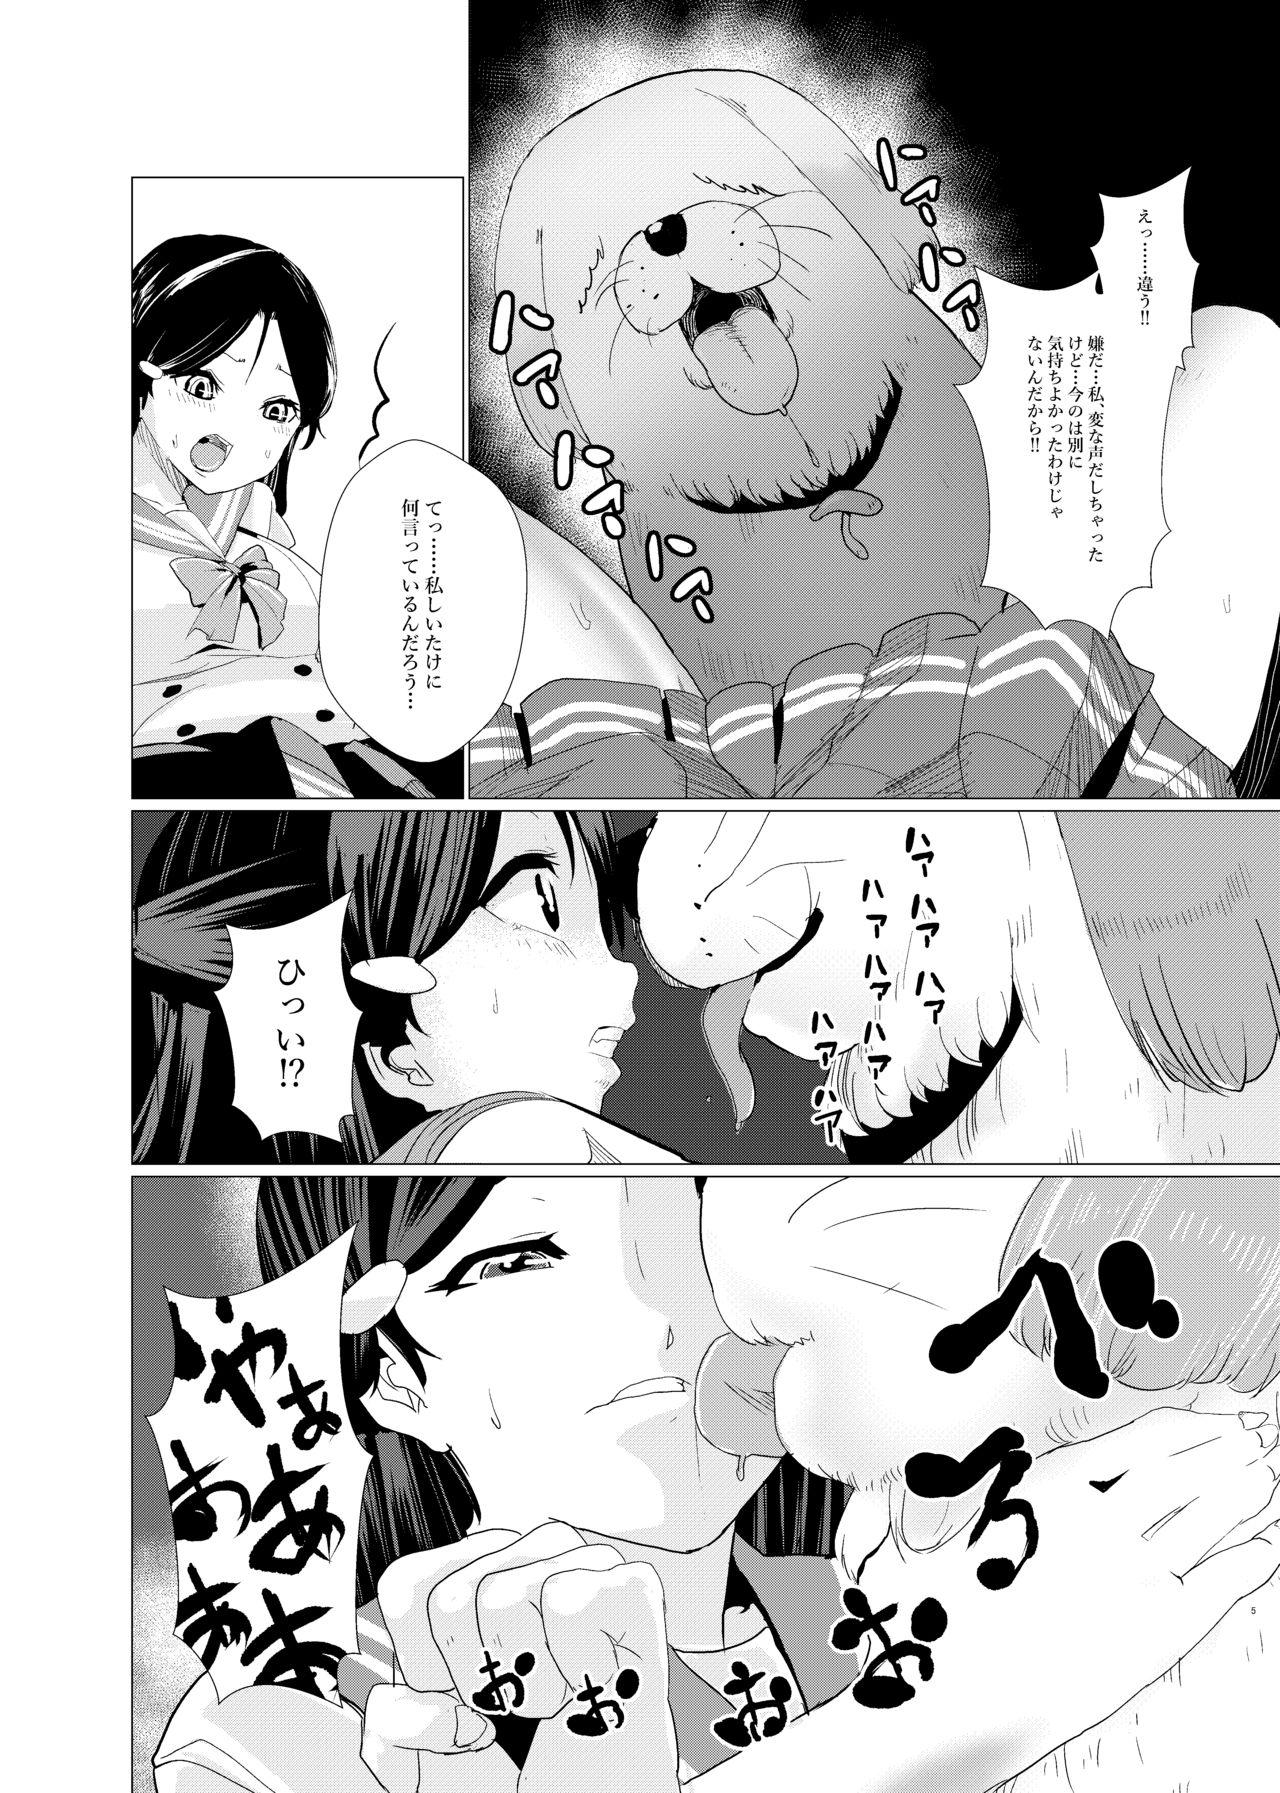 Mexico Star Guard Dog - Love live Twerking - Page 7